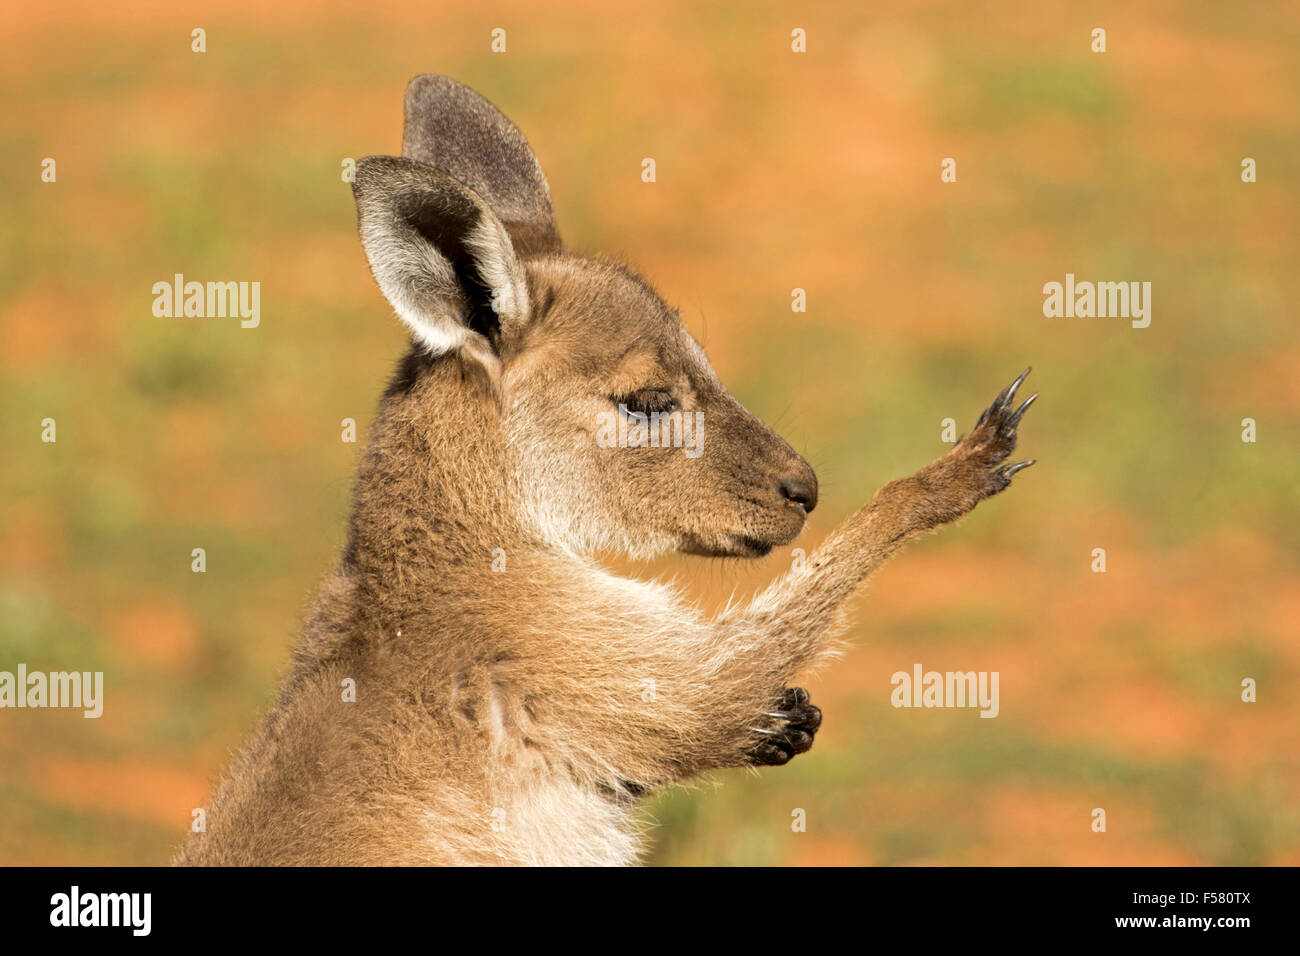 Face of young western grey kangaroo, Macropus fuliginosus in the wild at Mungo National Park in outback NSW Australia, Stock Photo